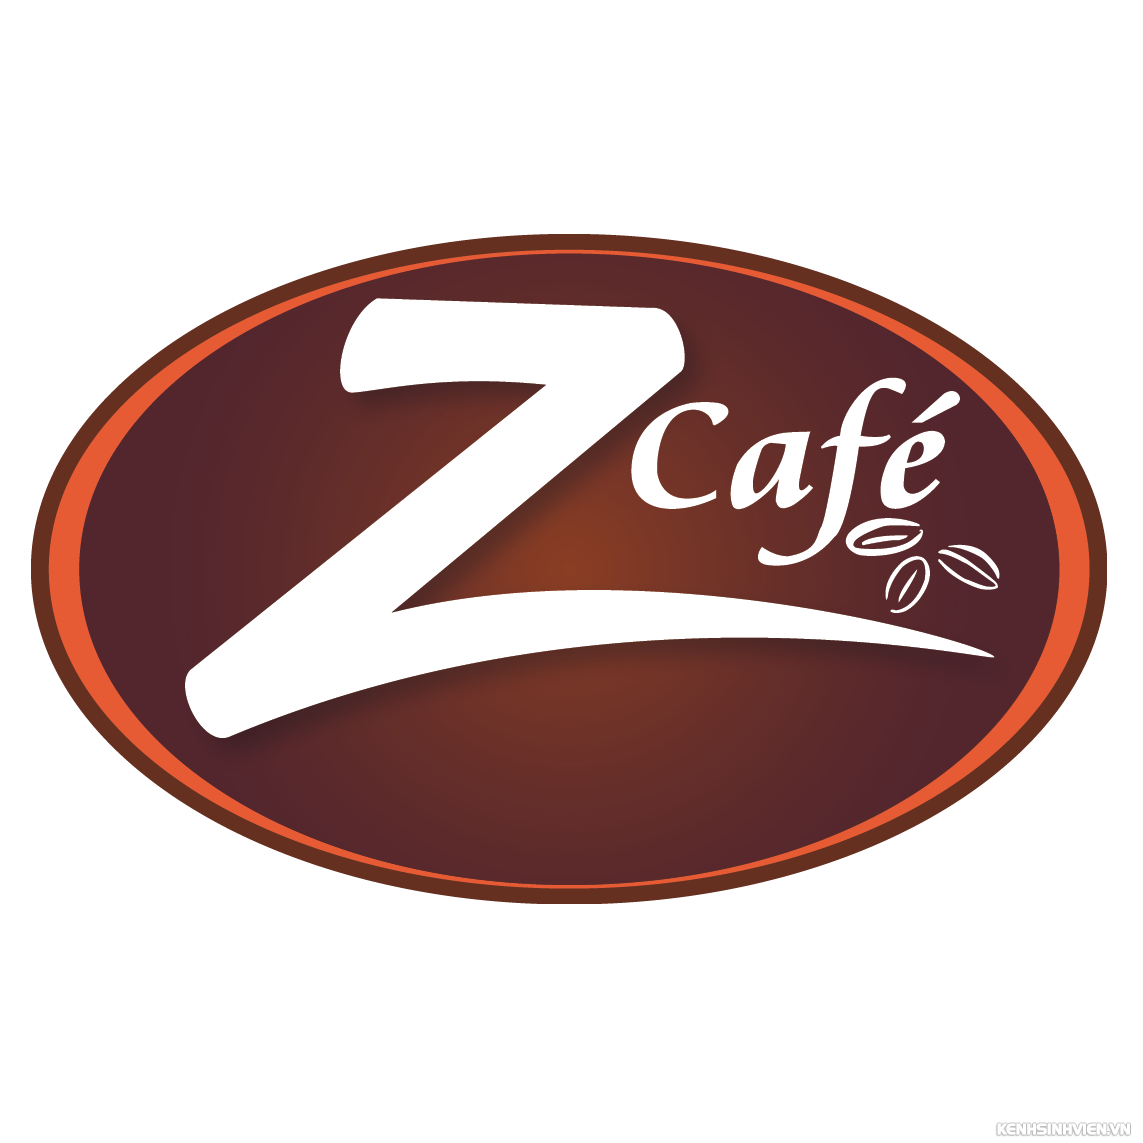 zcafe-1.png